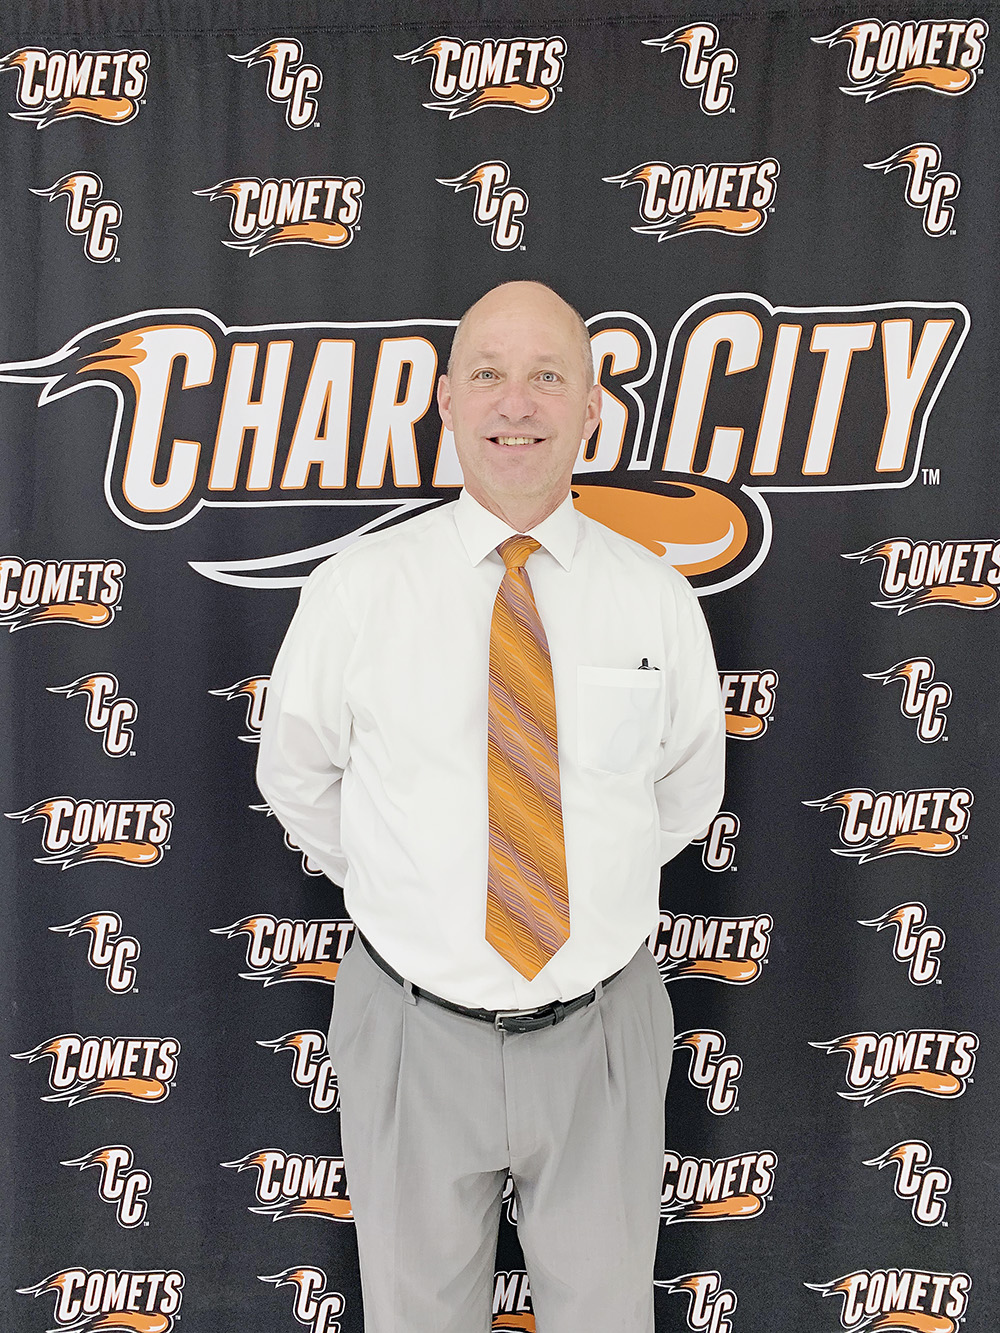 CCHS’s Wolfe to head team for new innovative campus